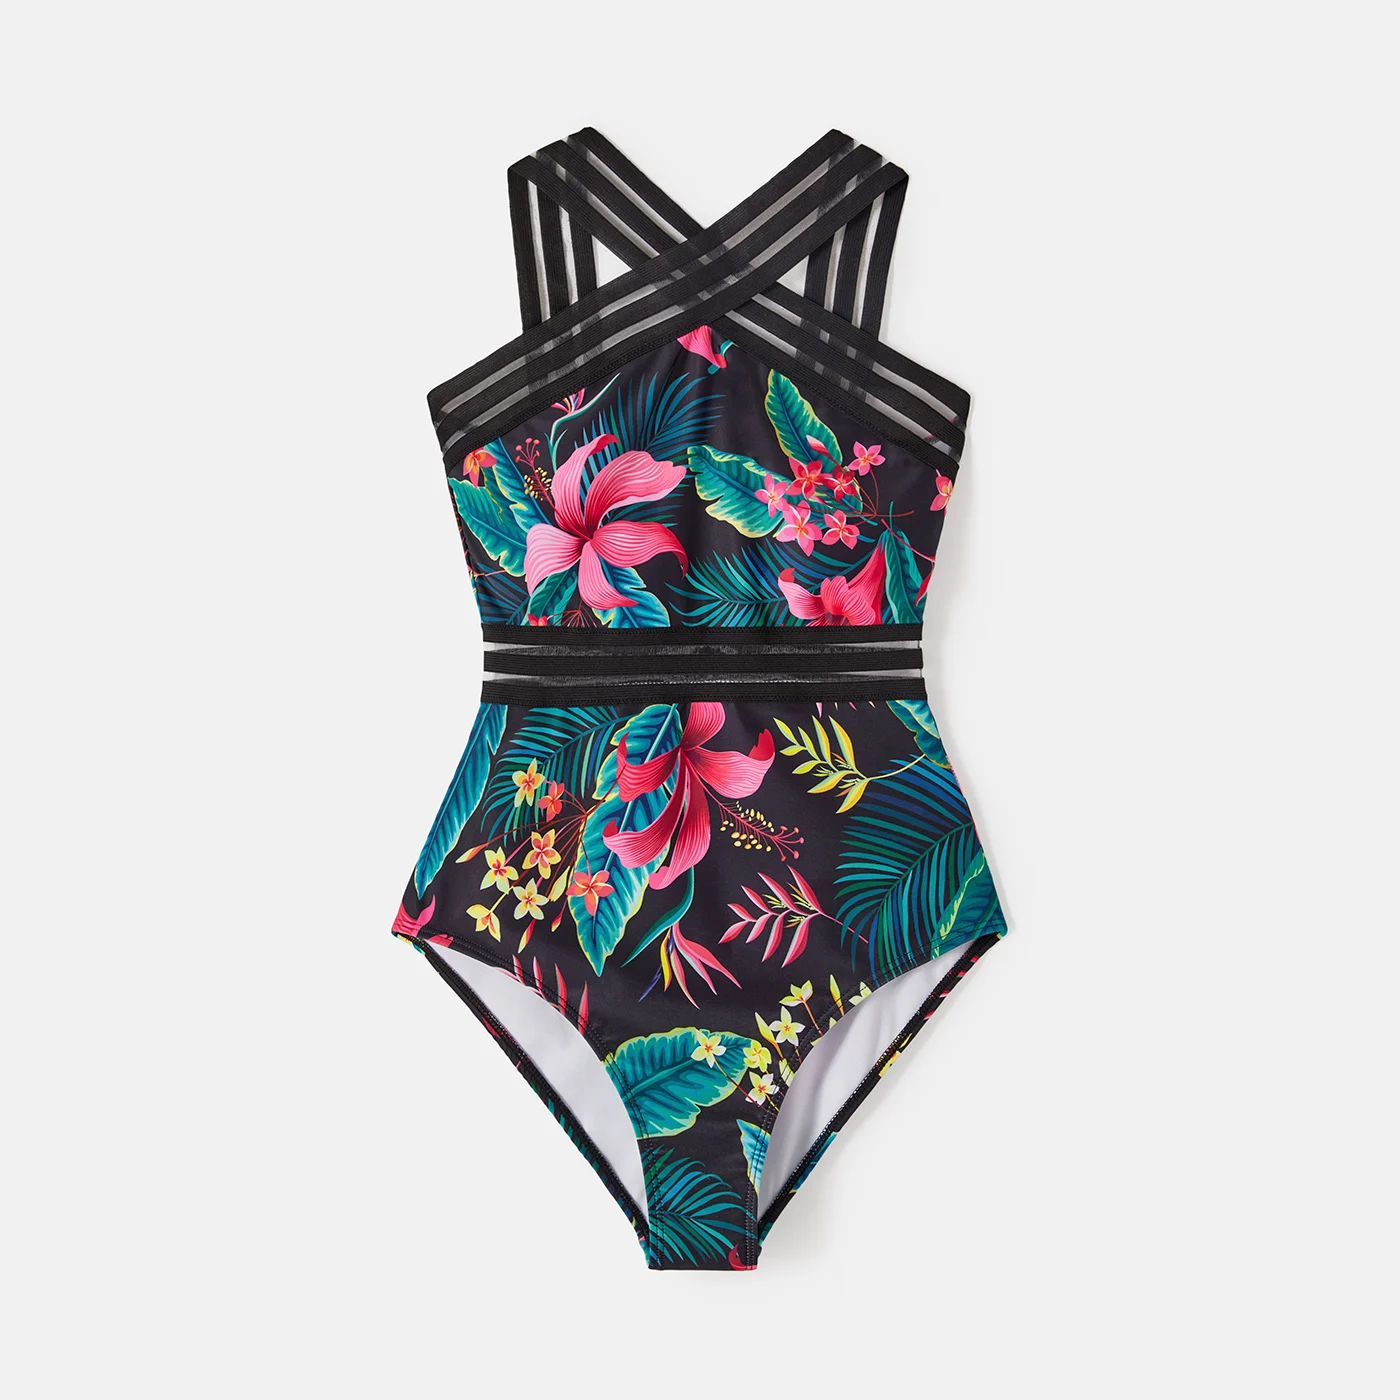 PatPat Family Matching Swimsuit Allover Plant Print Crisscross One-Piece Swimsuit and Swim Trunks